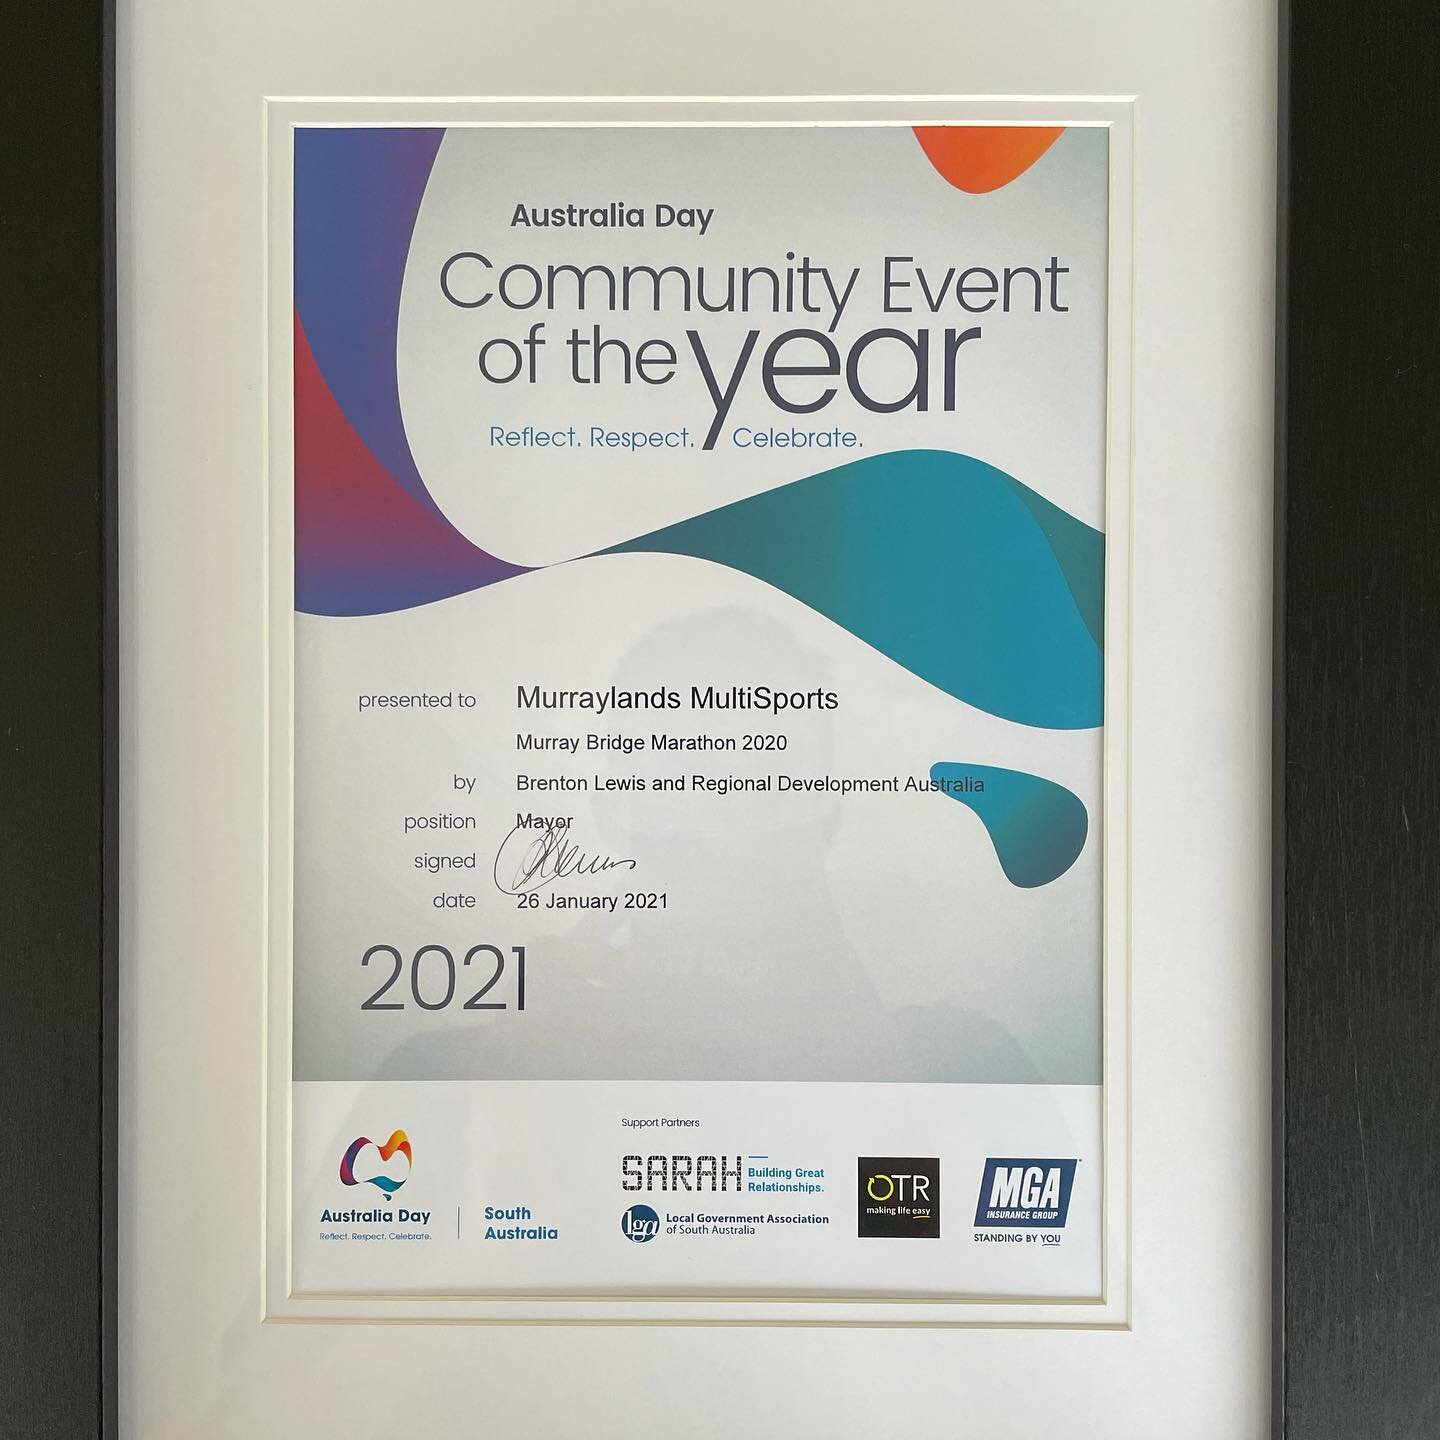 Congratulations to the MMI events team who took out the &ldquo;Community Event of the Year&rdquo; award for the Murray Bridge Marathon Festival 2020.
This was a fantastic achievement for our volunteer organisation that was able to activate, engage wi